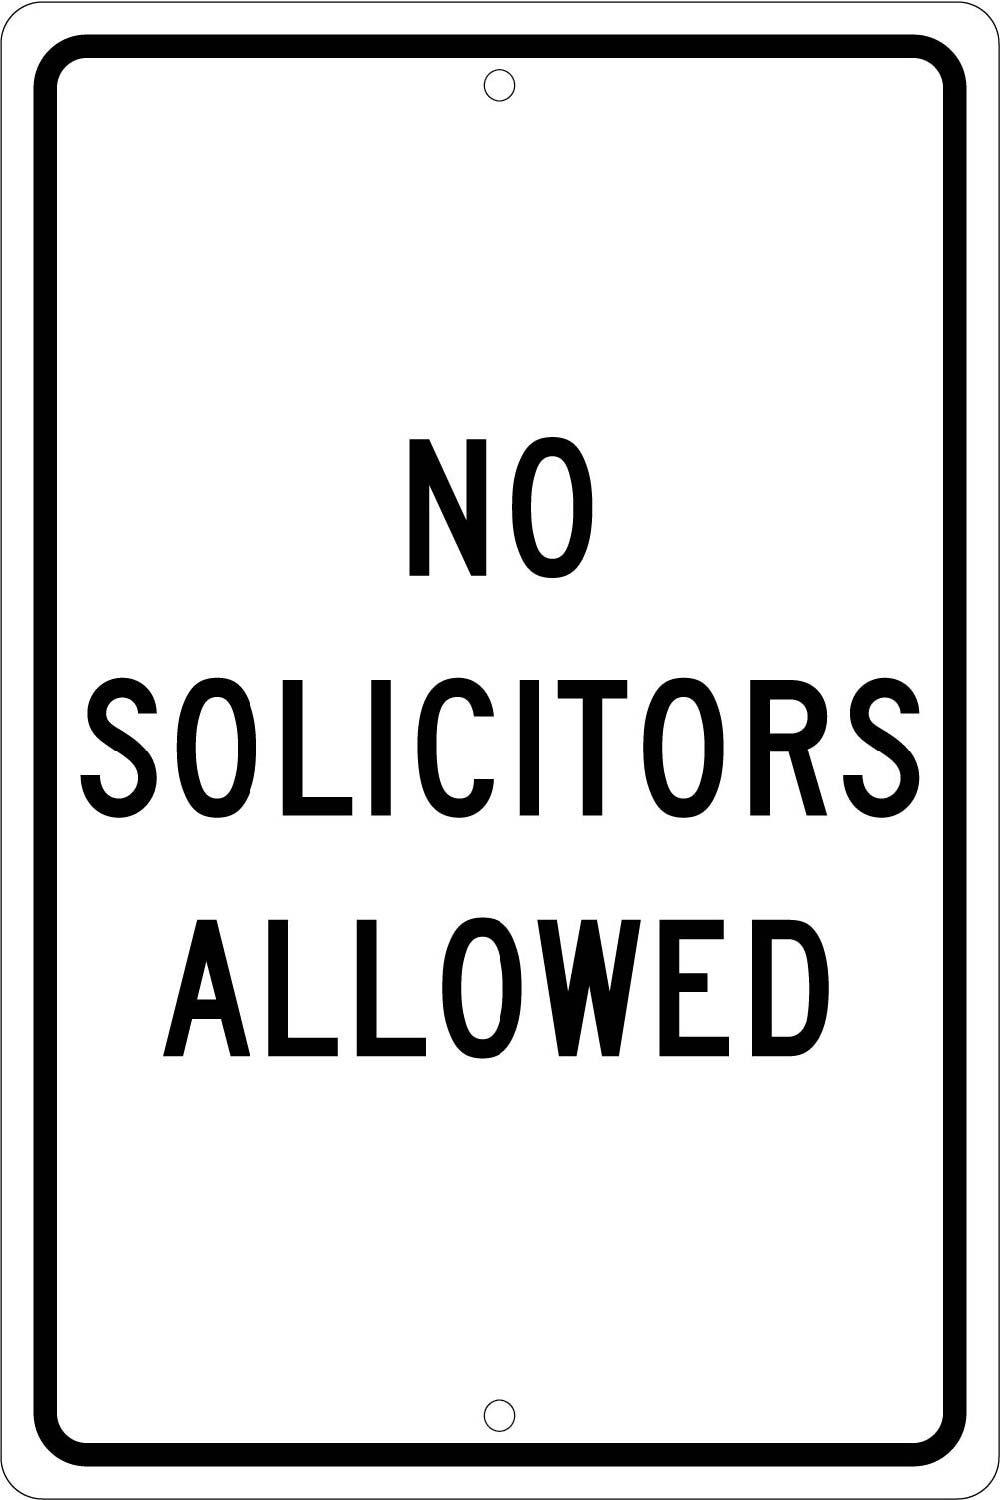 No Solicitors Allowed Sign-eSafety Supplies, Inc